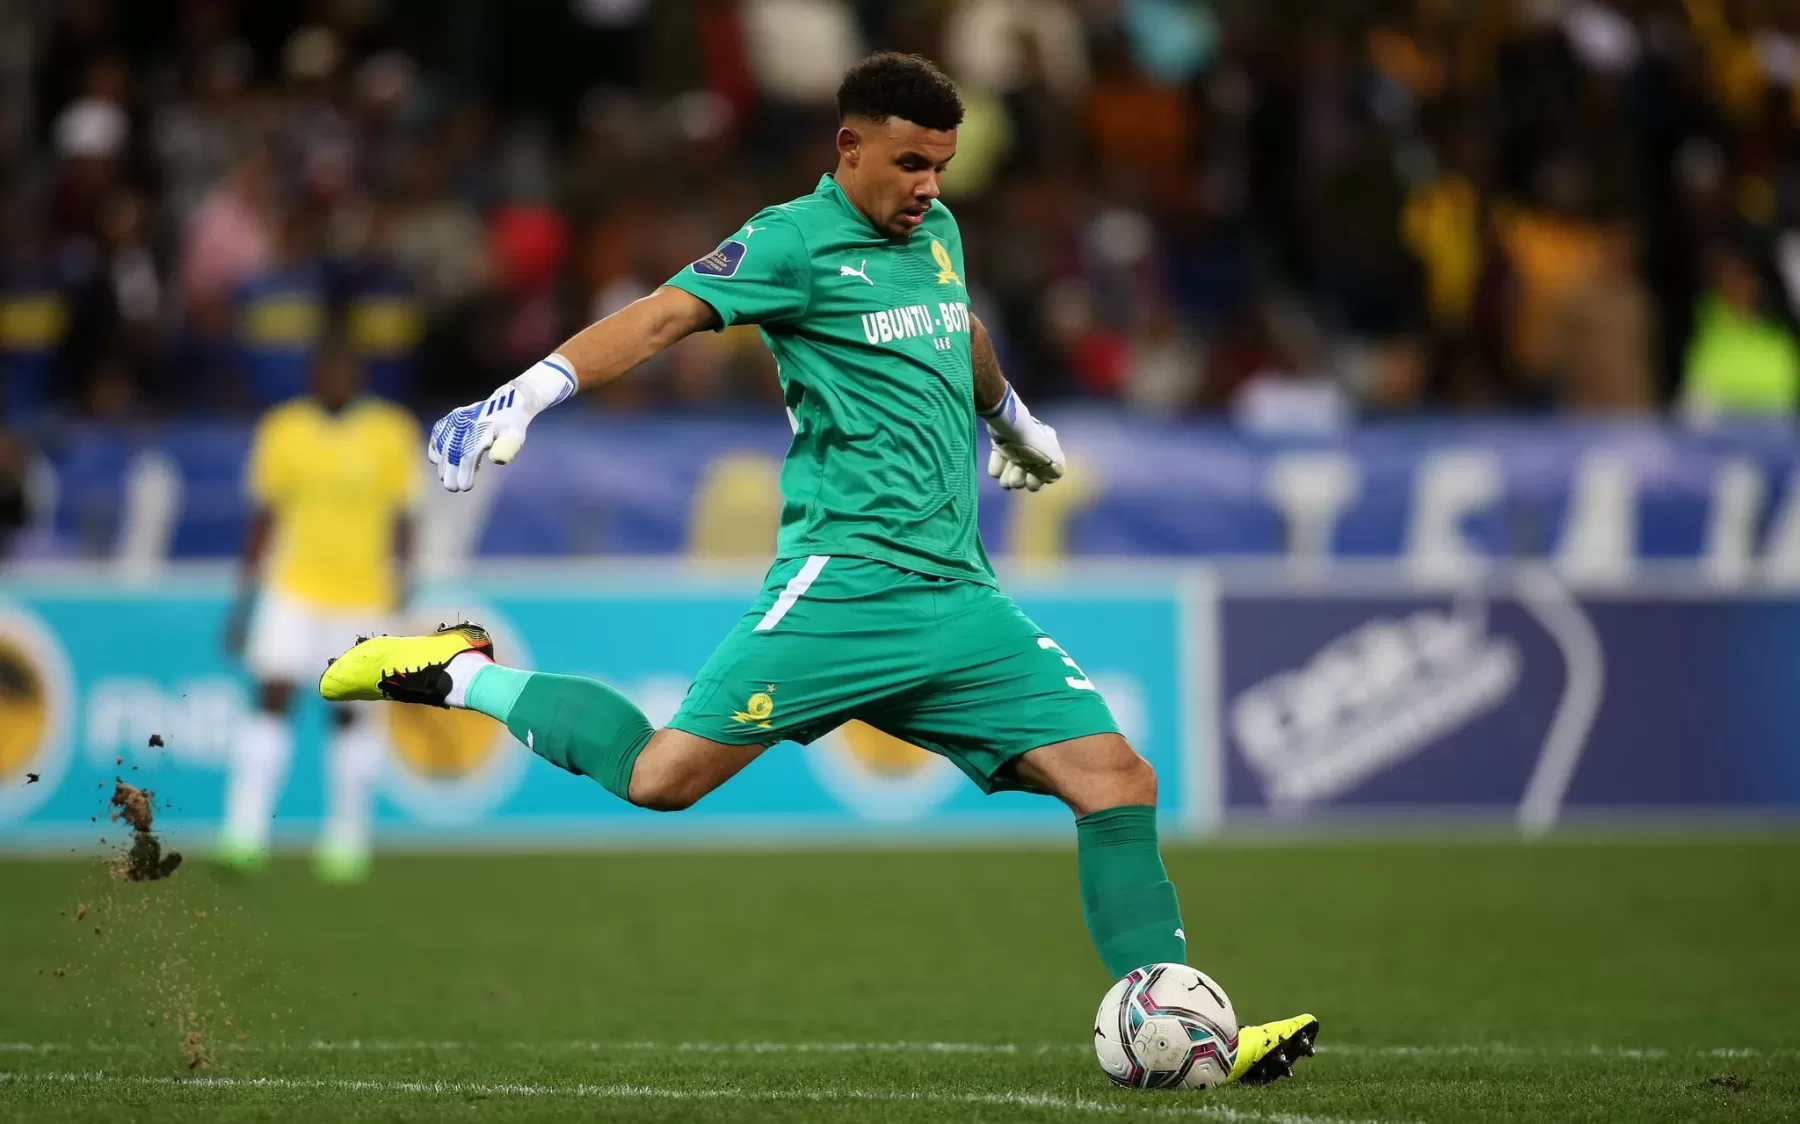 Ronwen Williams has been exceptional for Sundowns